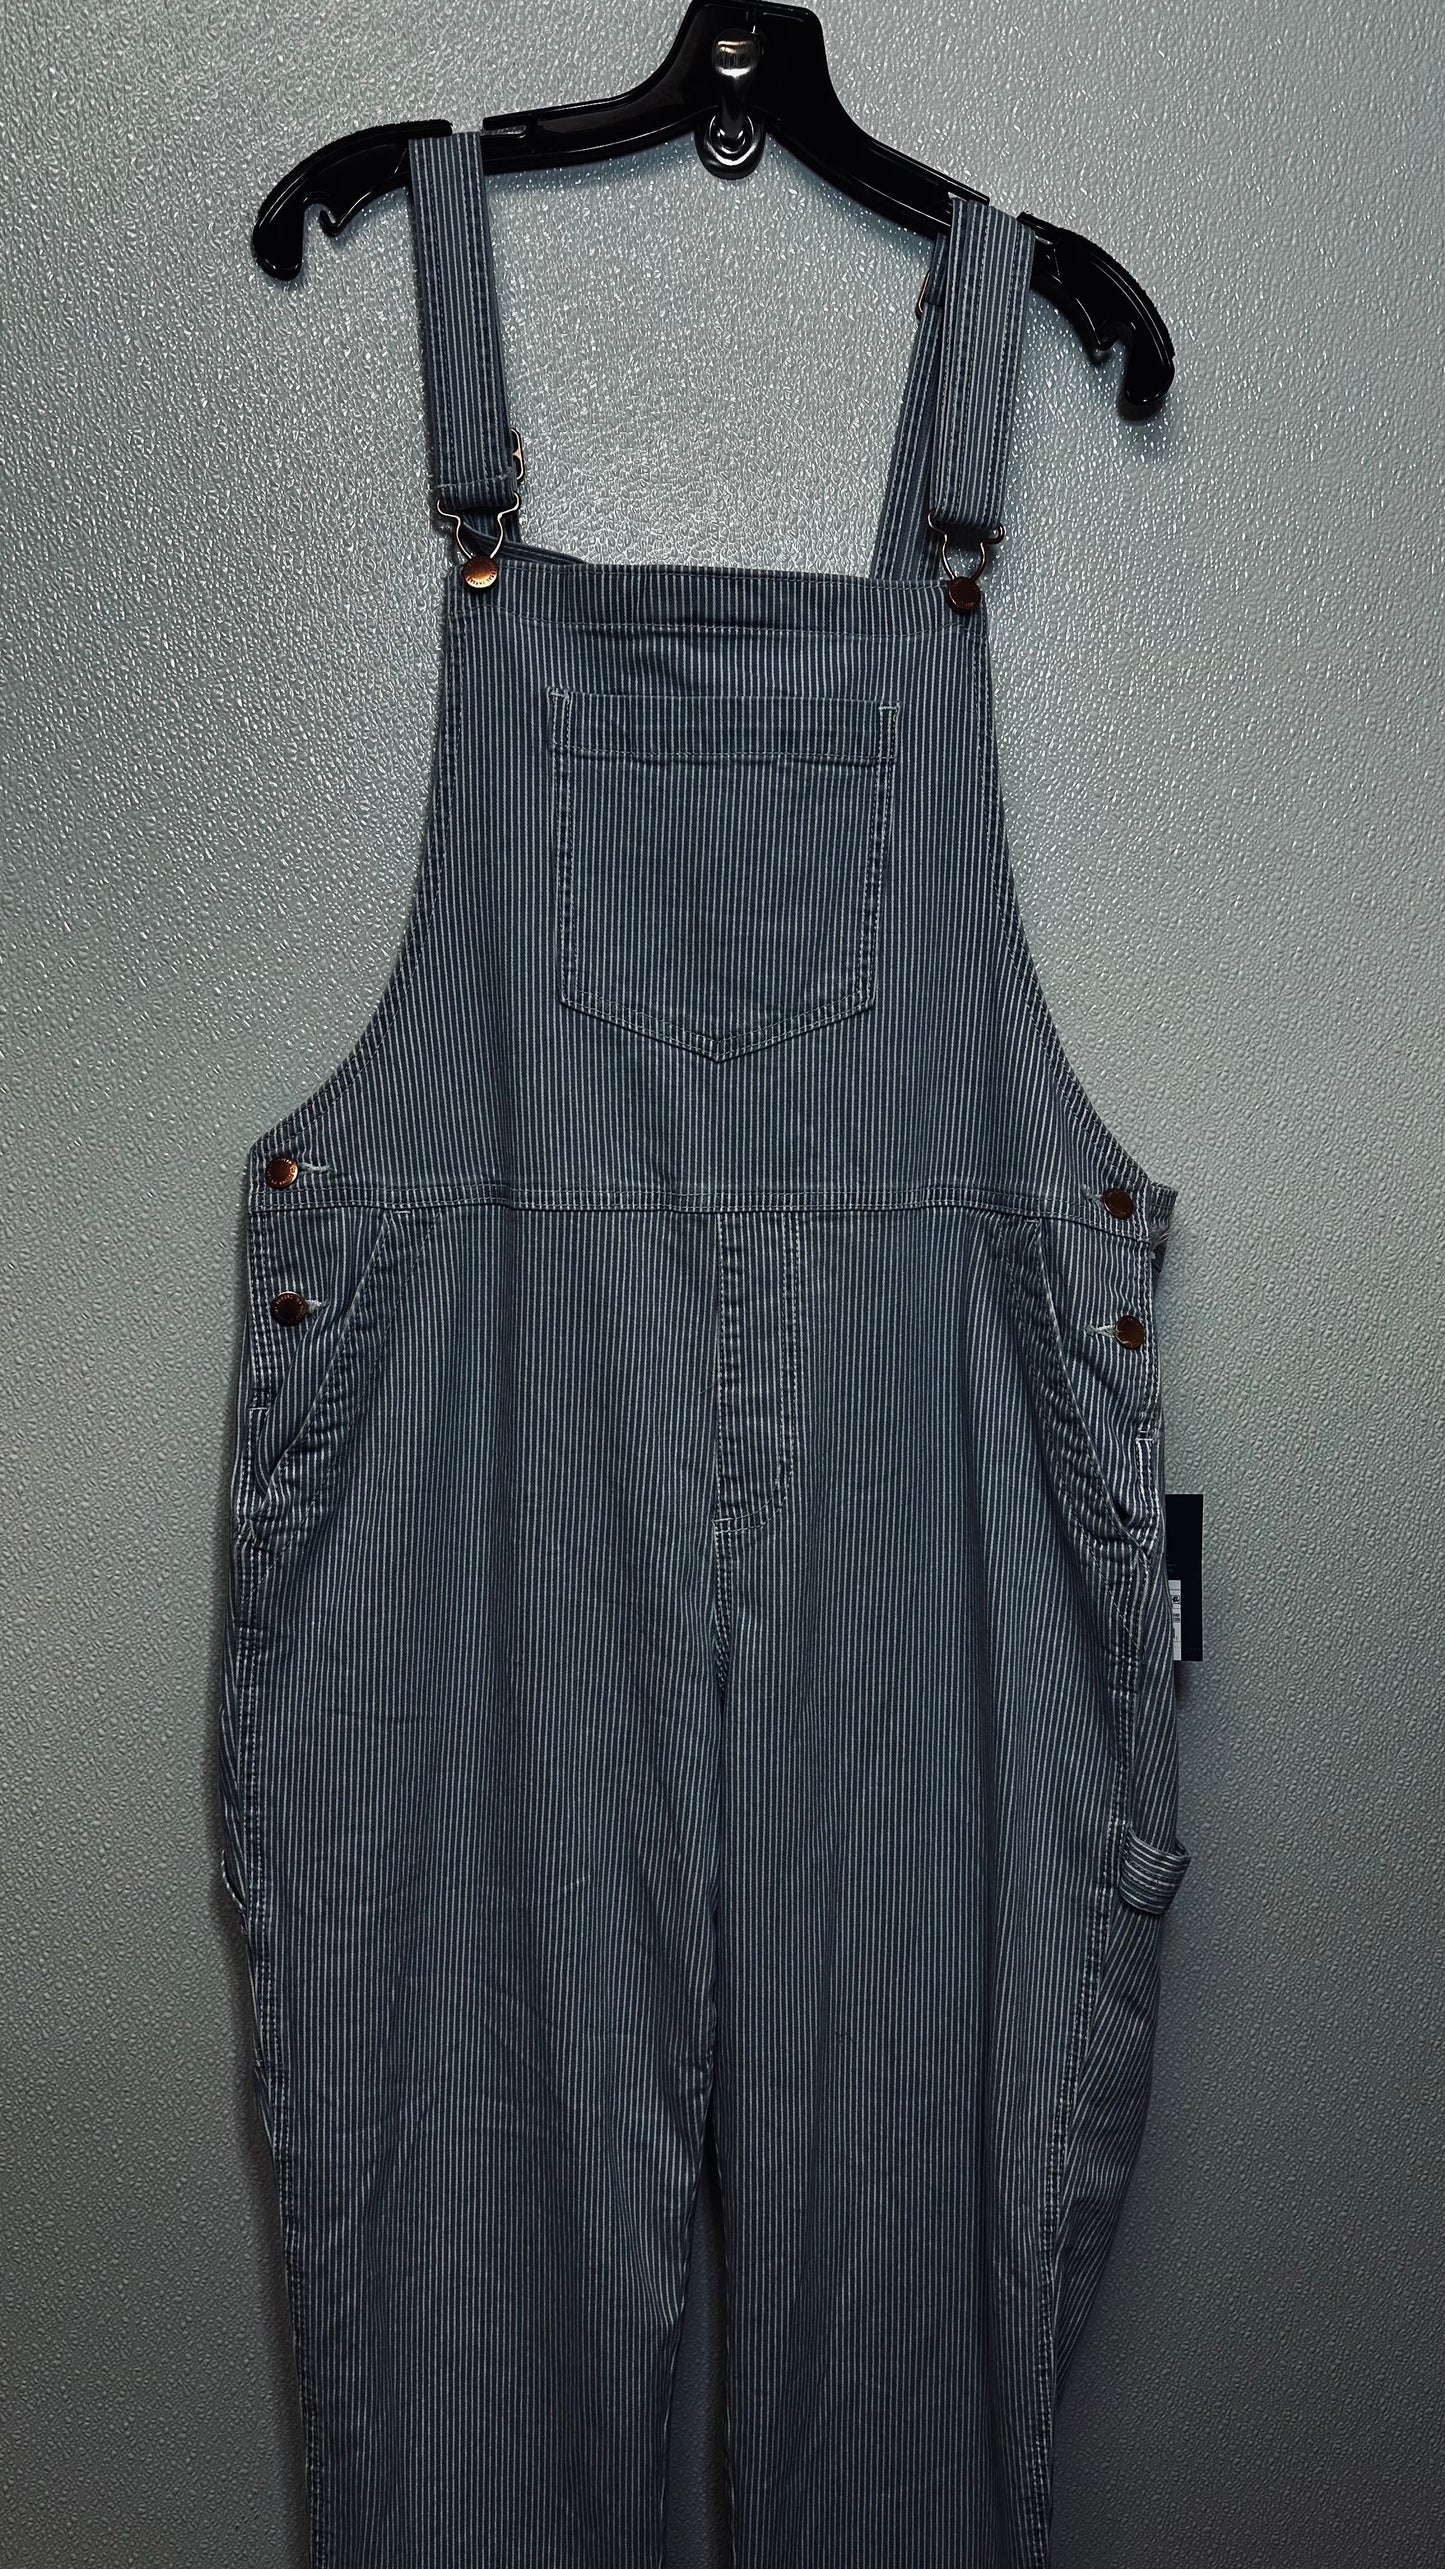 Baby Blue Overalls Universal Thread, Size 12